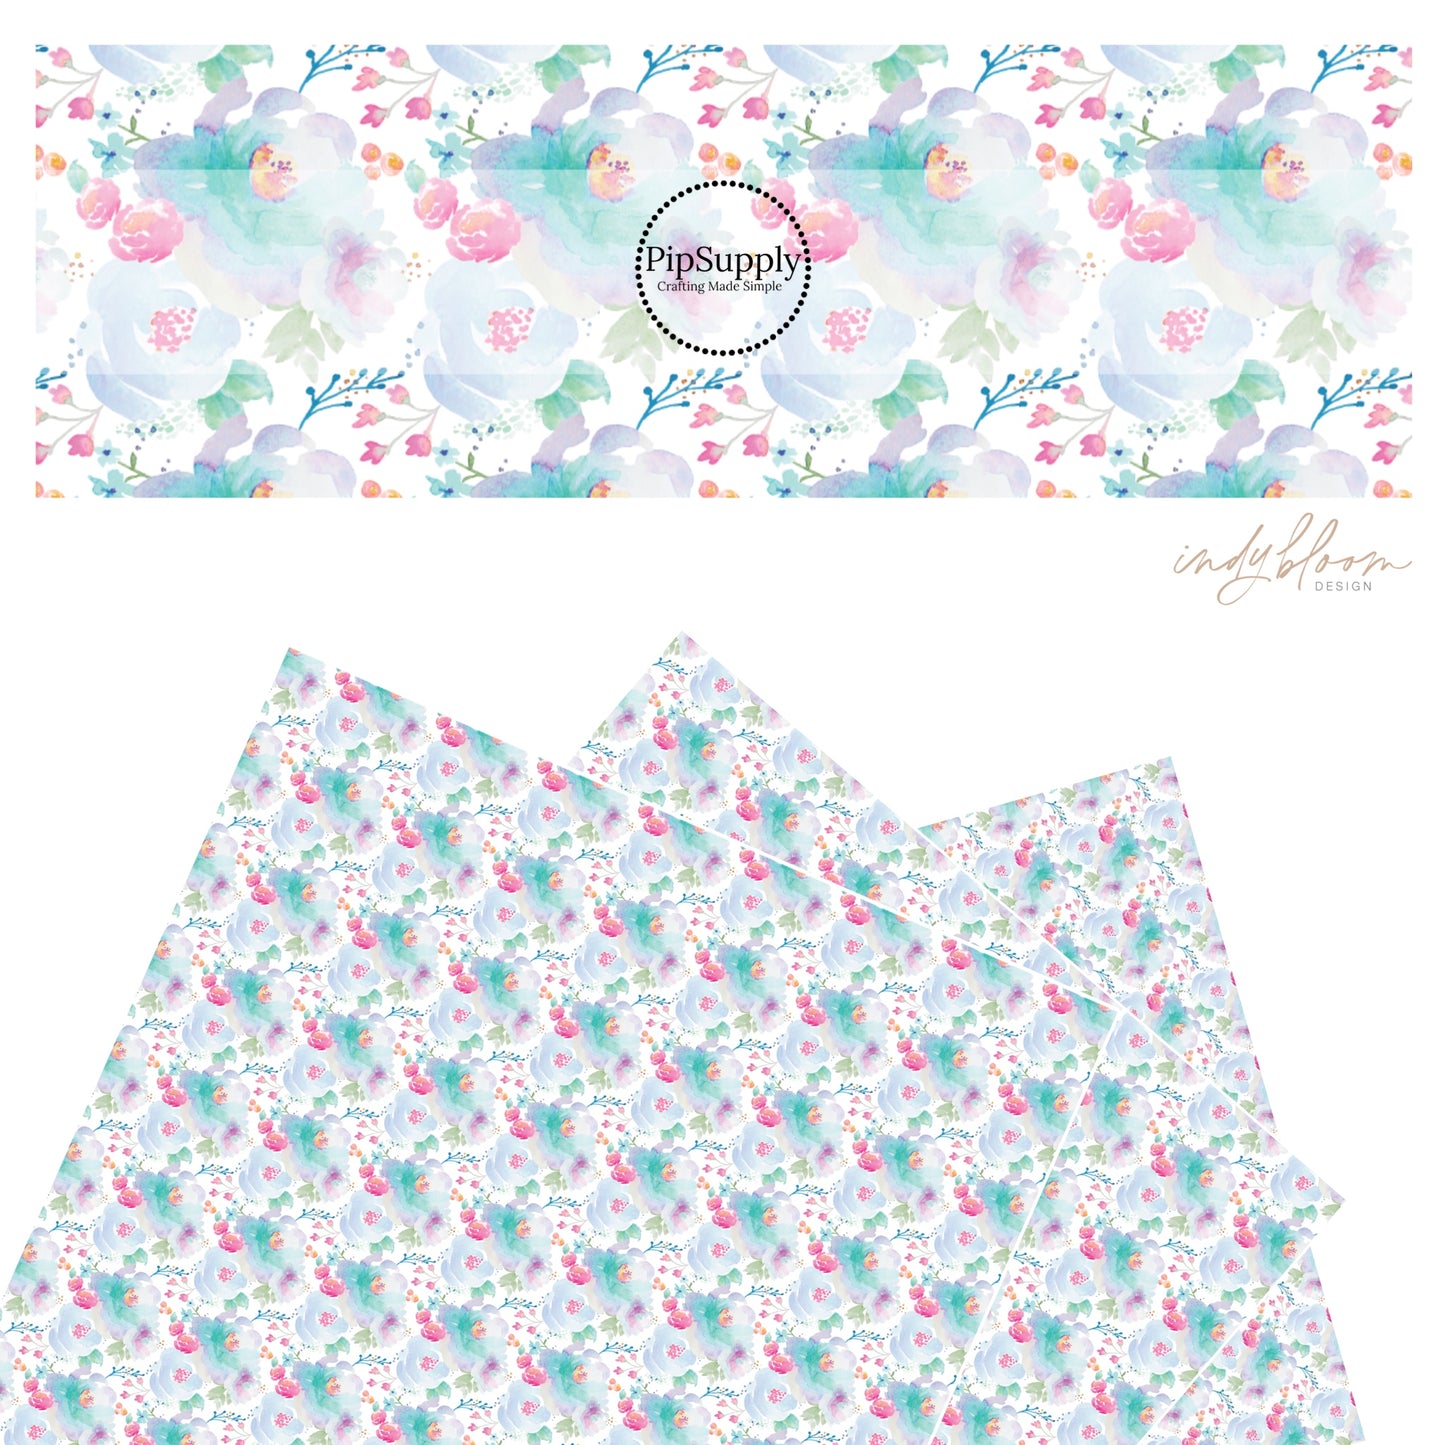 These pastel watercolor flowers on white faux leather sheets contain the following design elements: flowers in the colors of light pink, peach, light blue, teal, and green. 